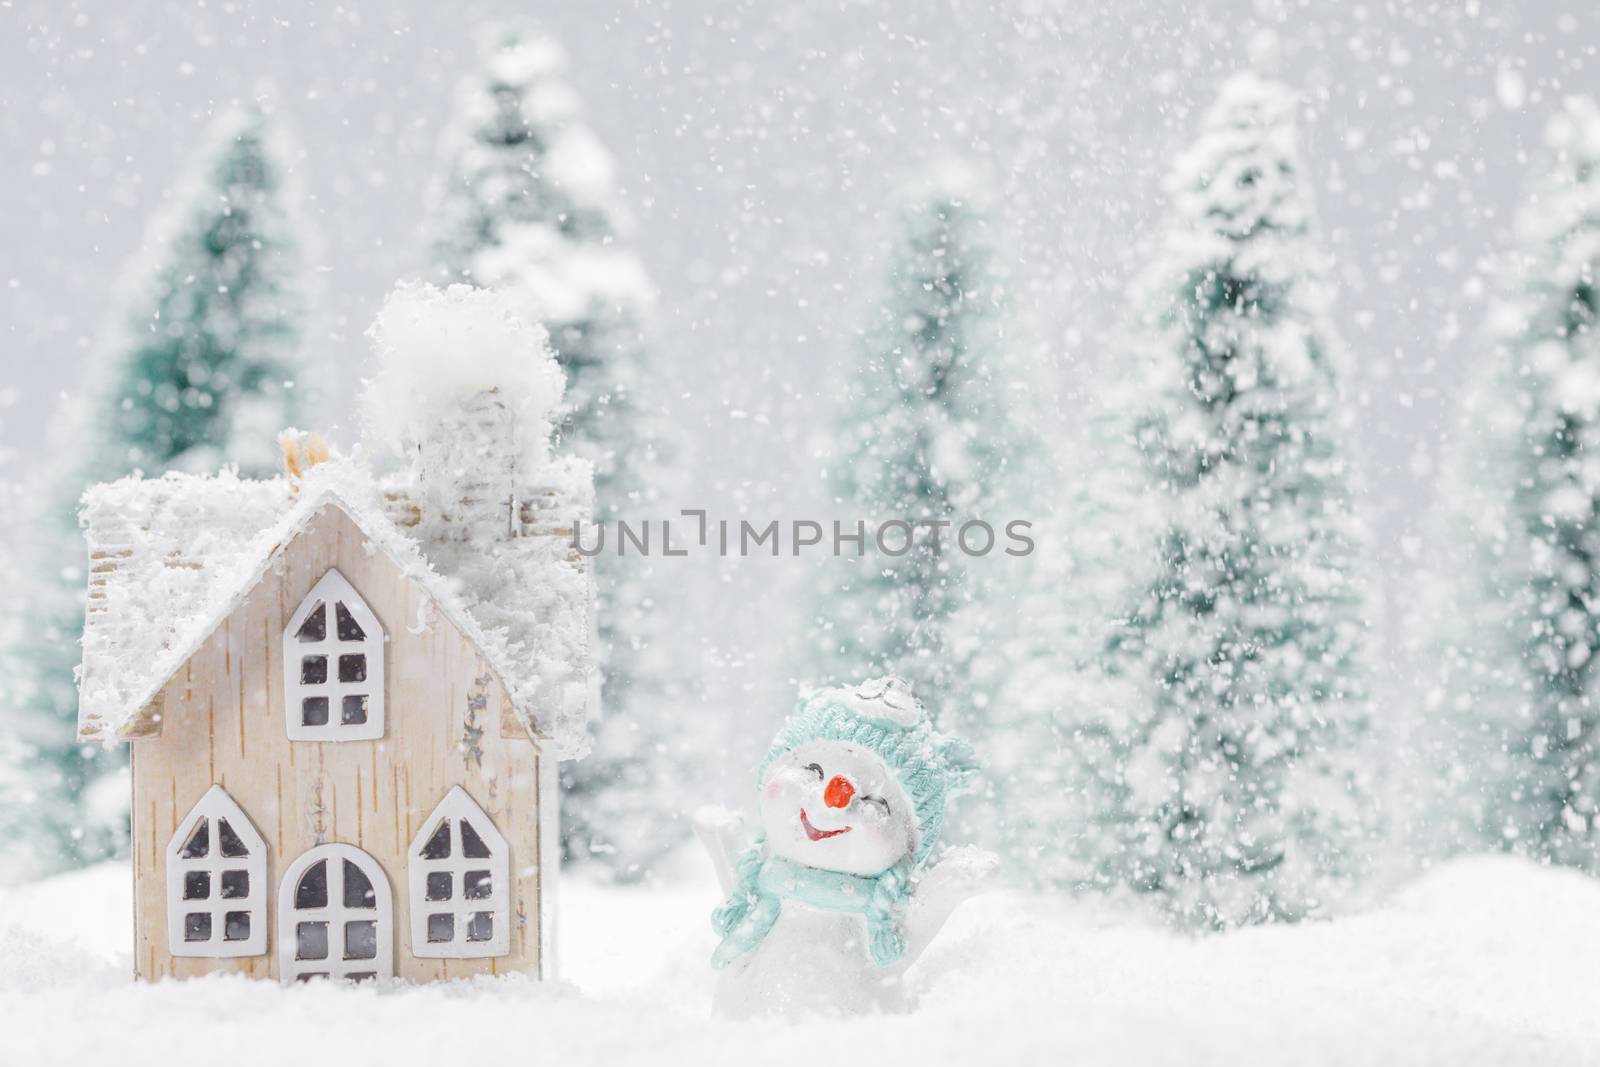 Snowman and house in winter by Yellowj